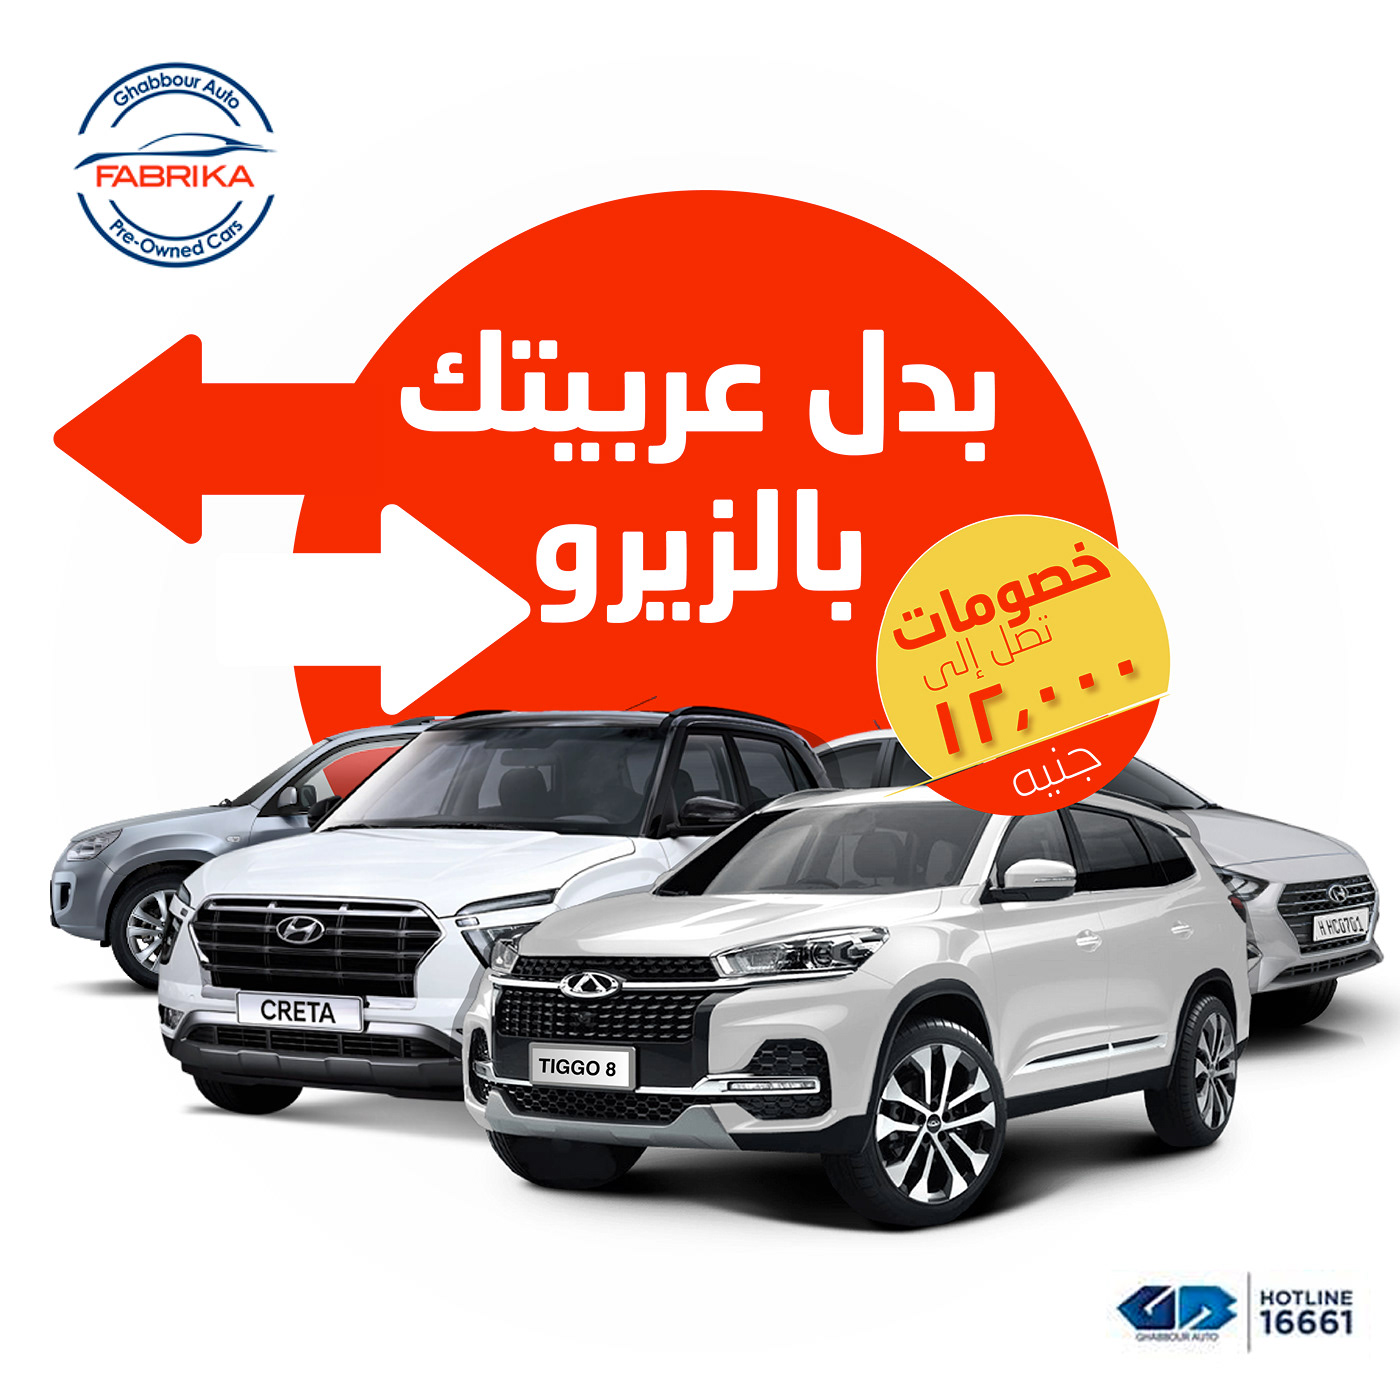 Advertising  car selling Cars graphic design 